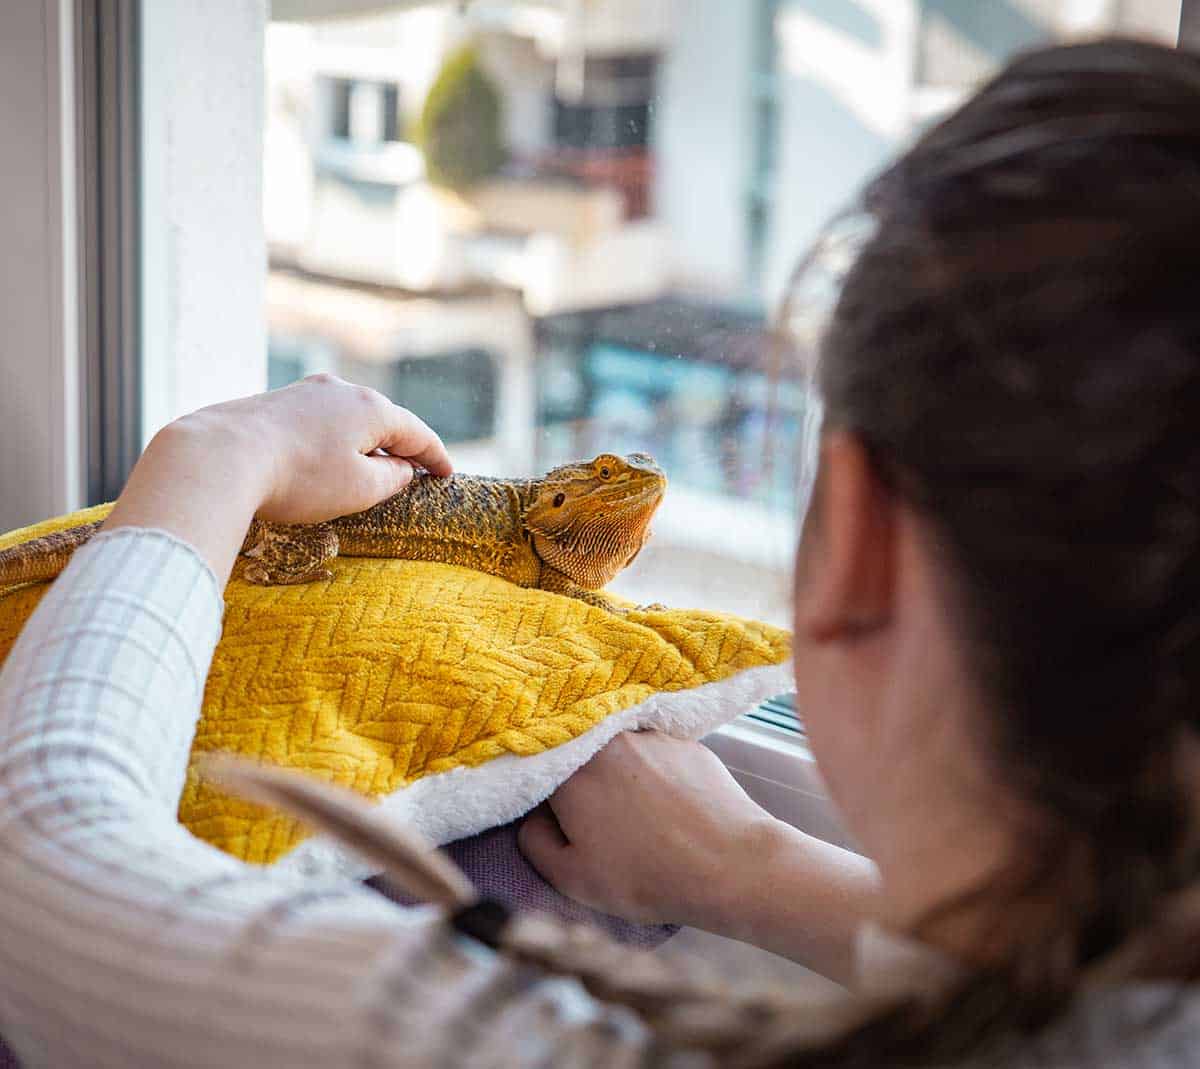 A woman with her reptile friend